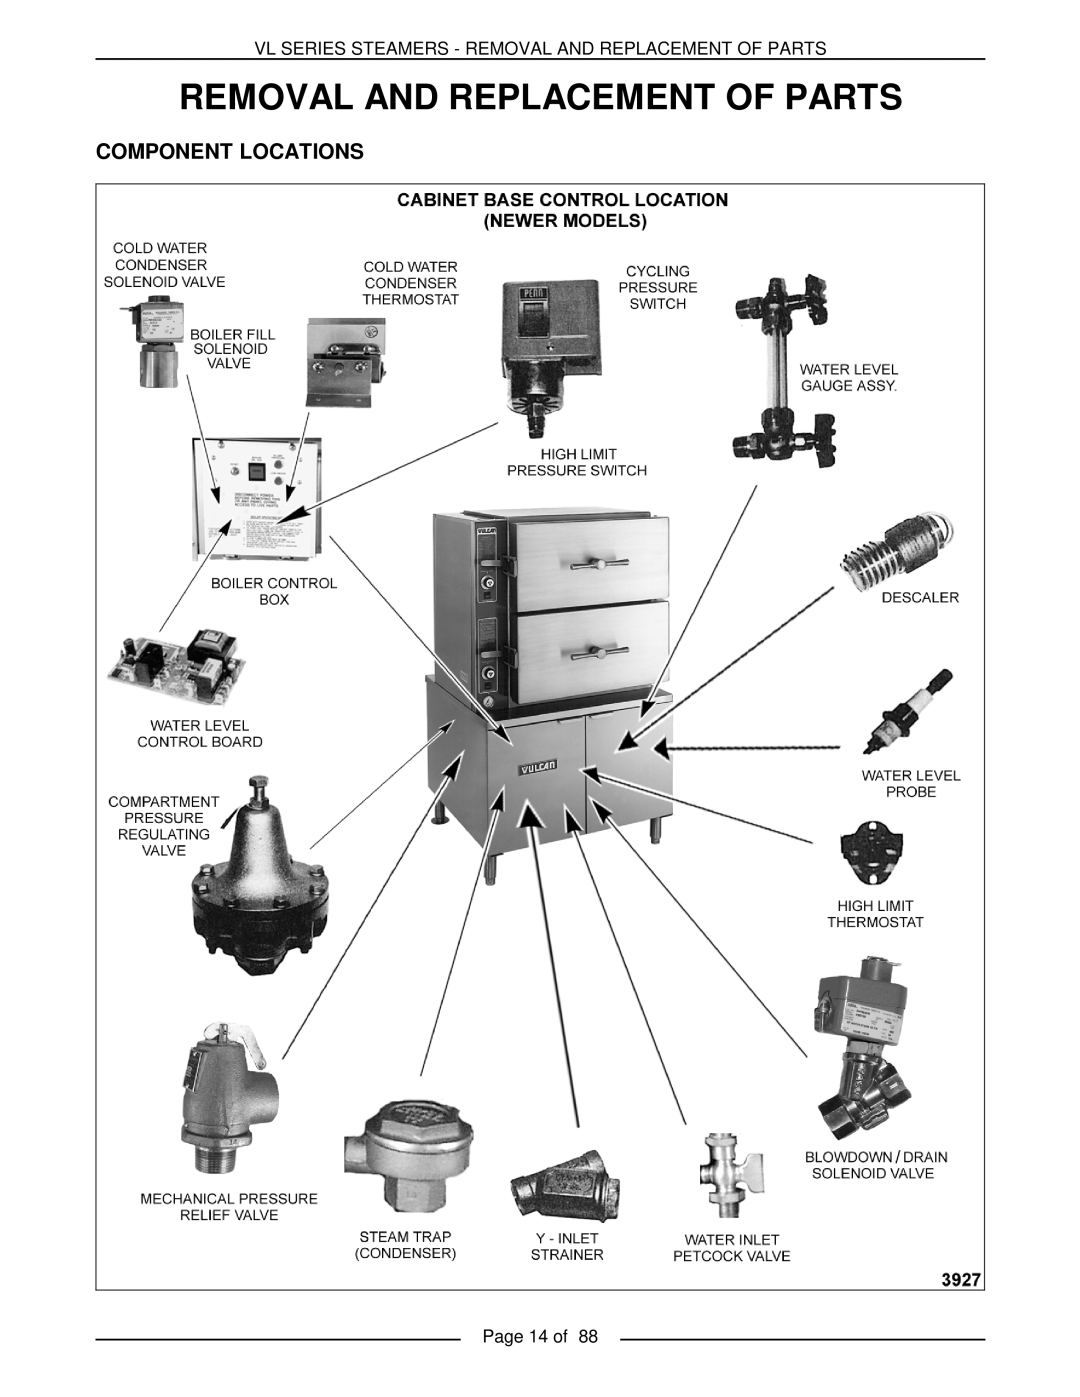 Vulcan-Hart VL3GPS, VL3GMS, VL2GMS, VL3GAS, VL2GAS, VL2GSS, VL3GSS, VL2GPS Removal And Replacement Of Parts, Component Locations 